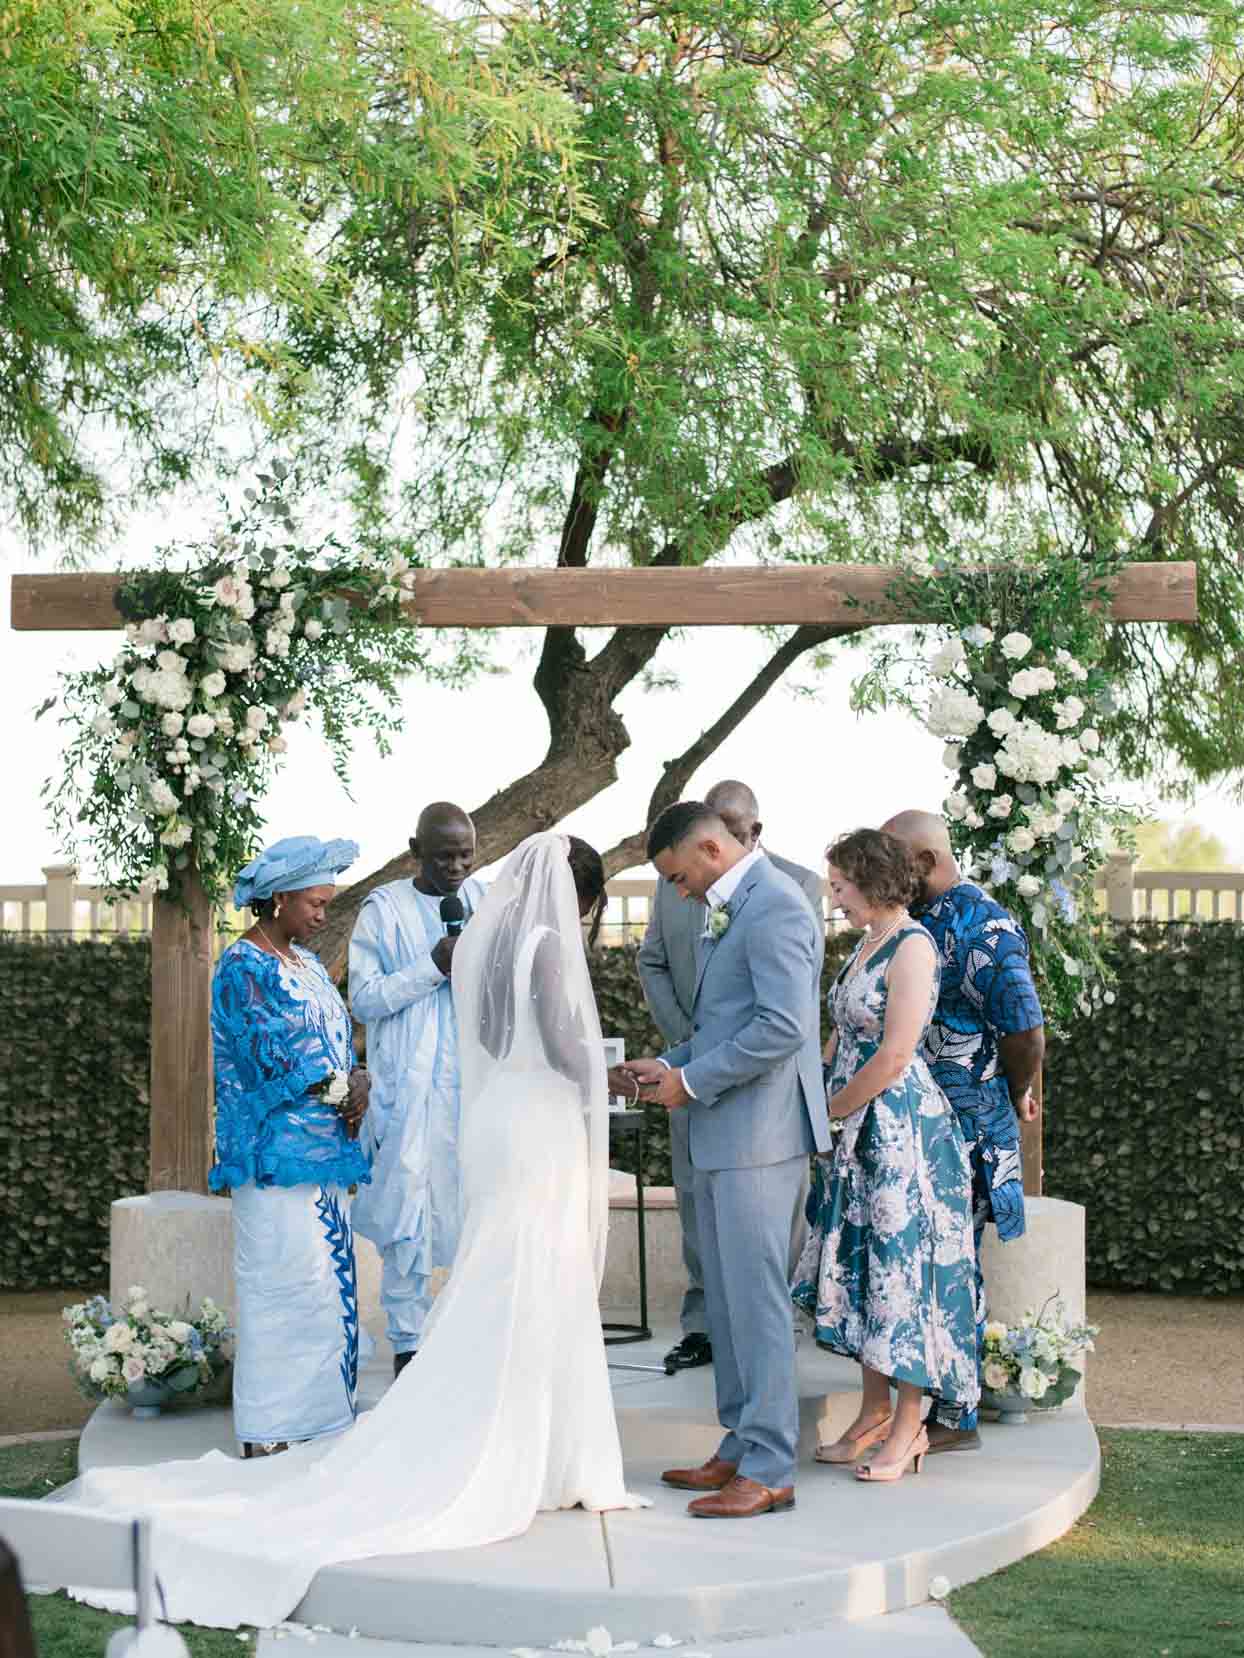 The Wedding Ceremony Featured Prayer and Religious Traditions